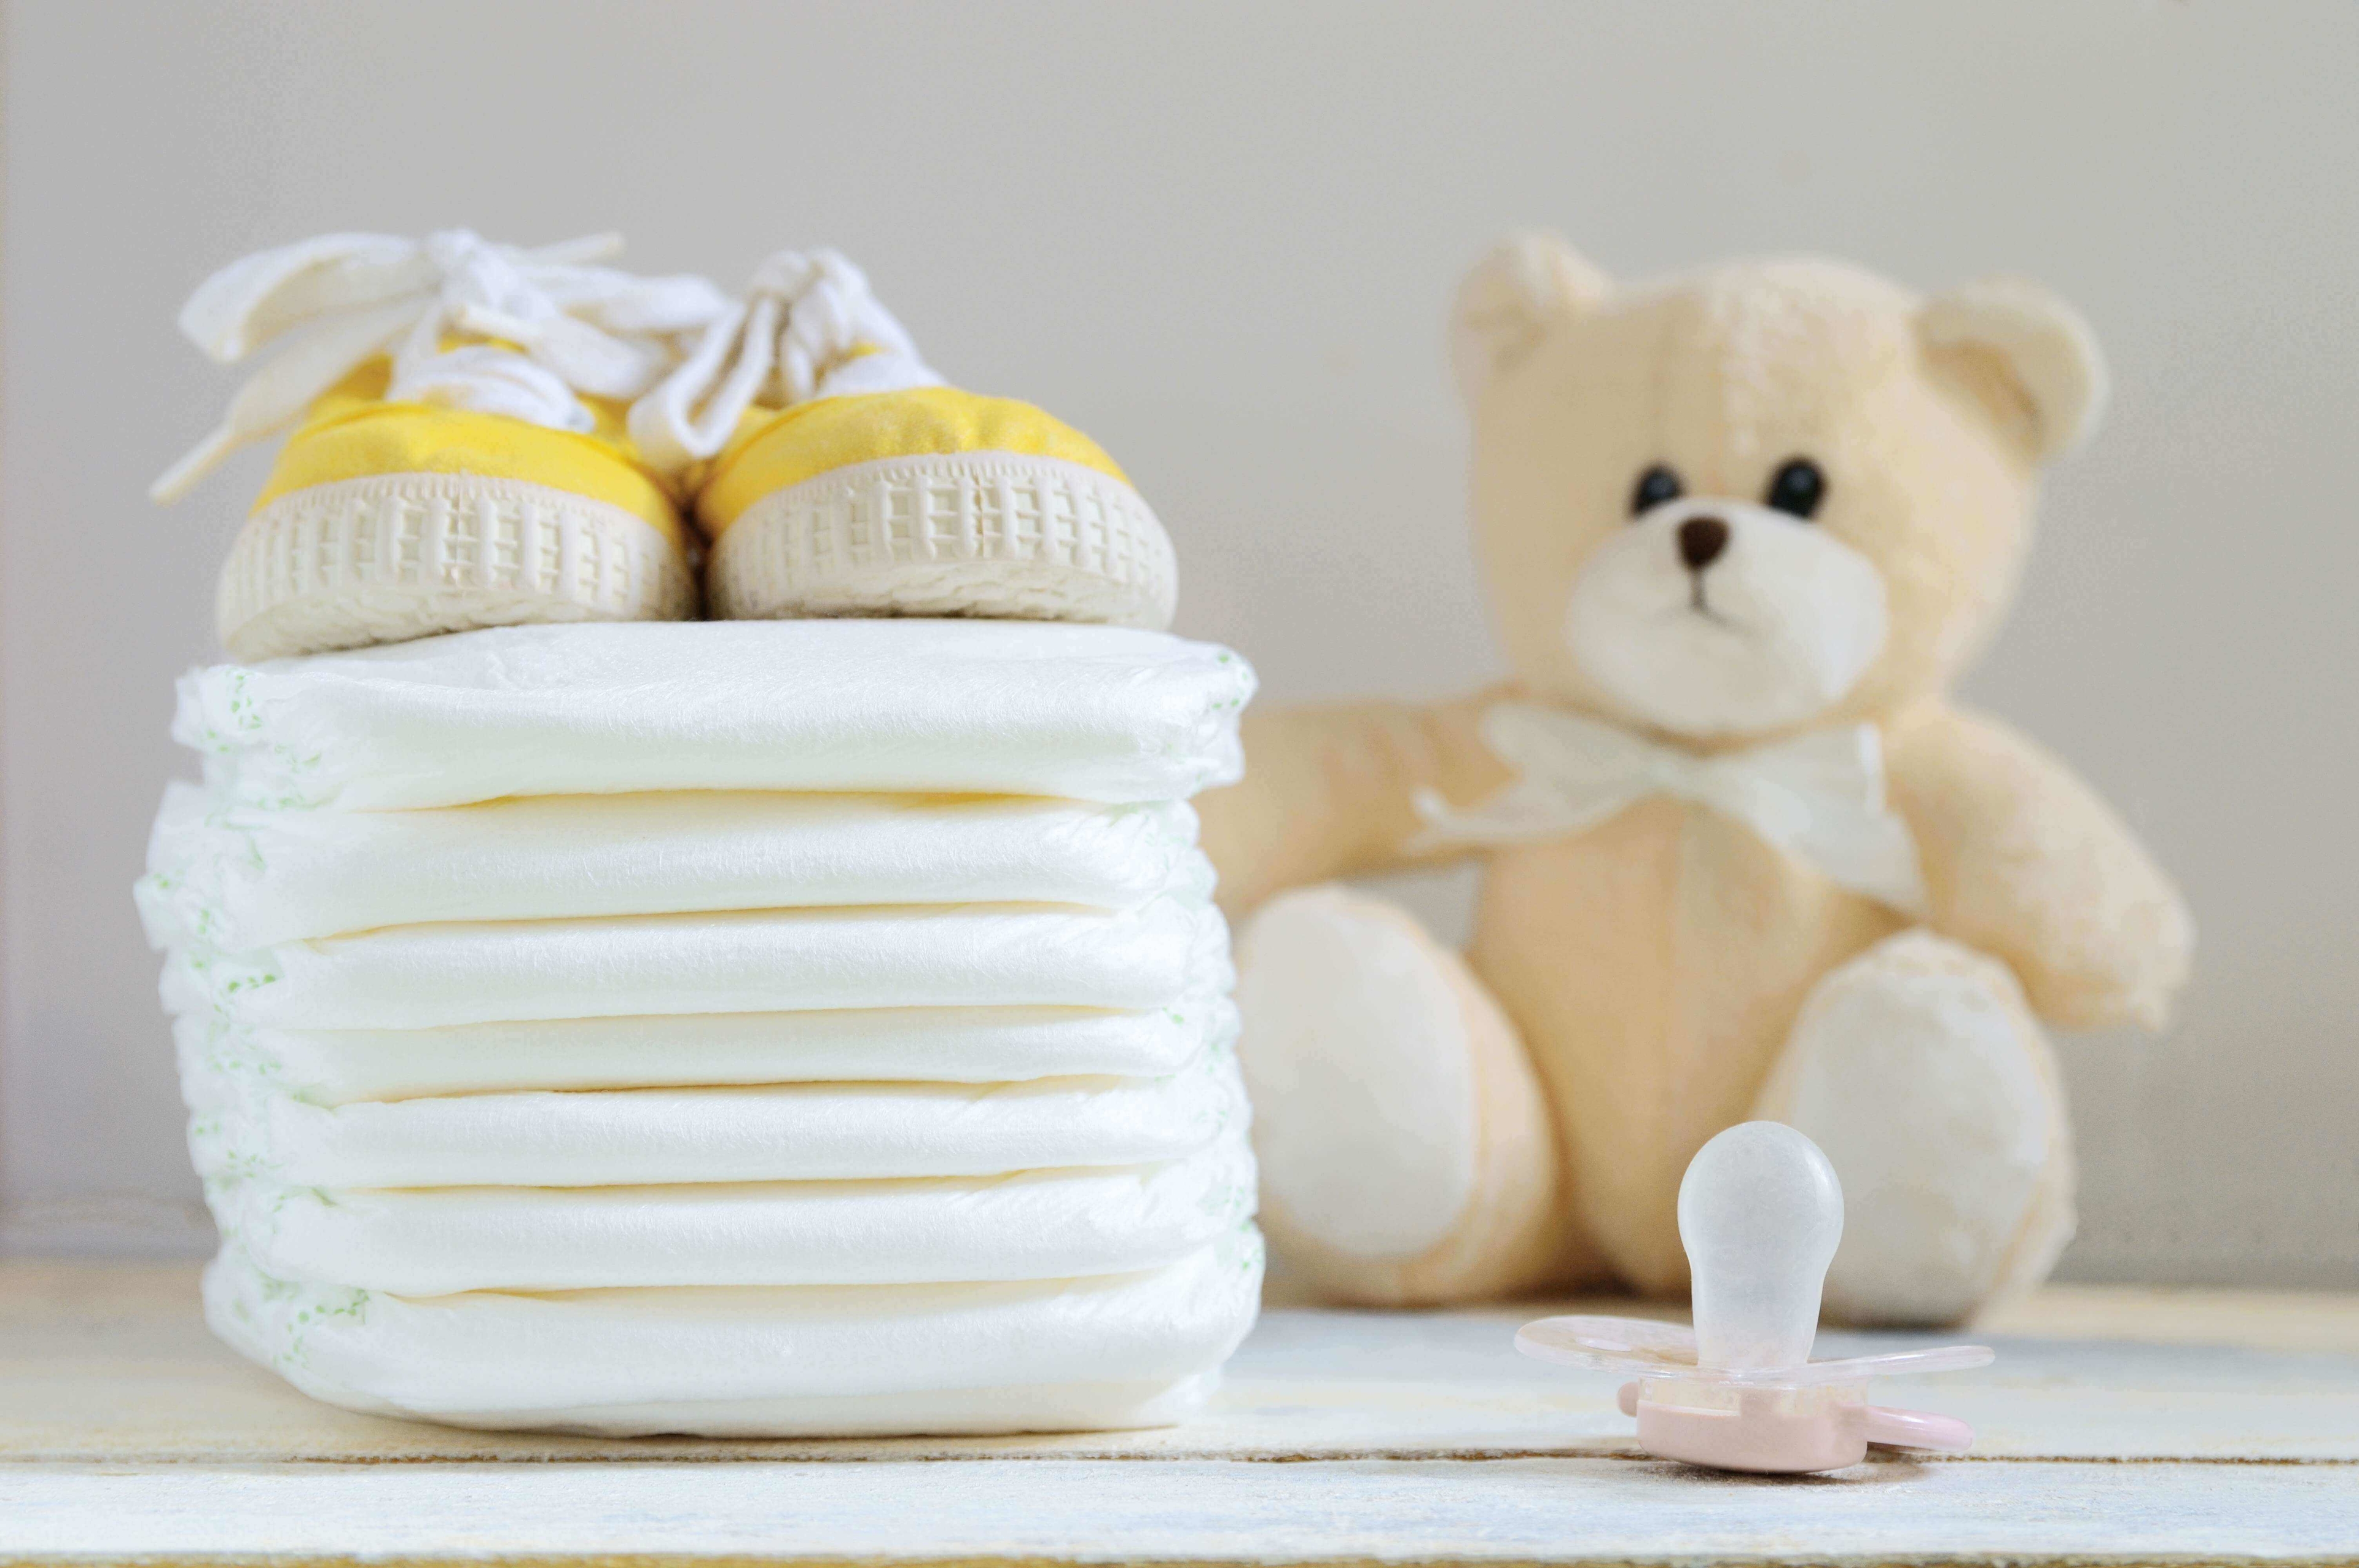 Baby diapers, yellow baby sneakers, a pacifier and a teddy bear